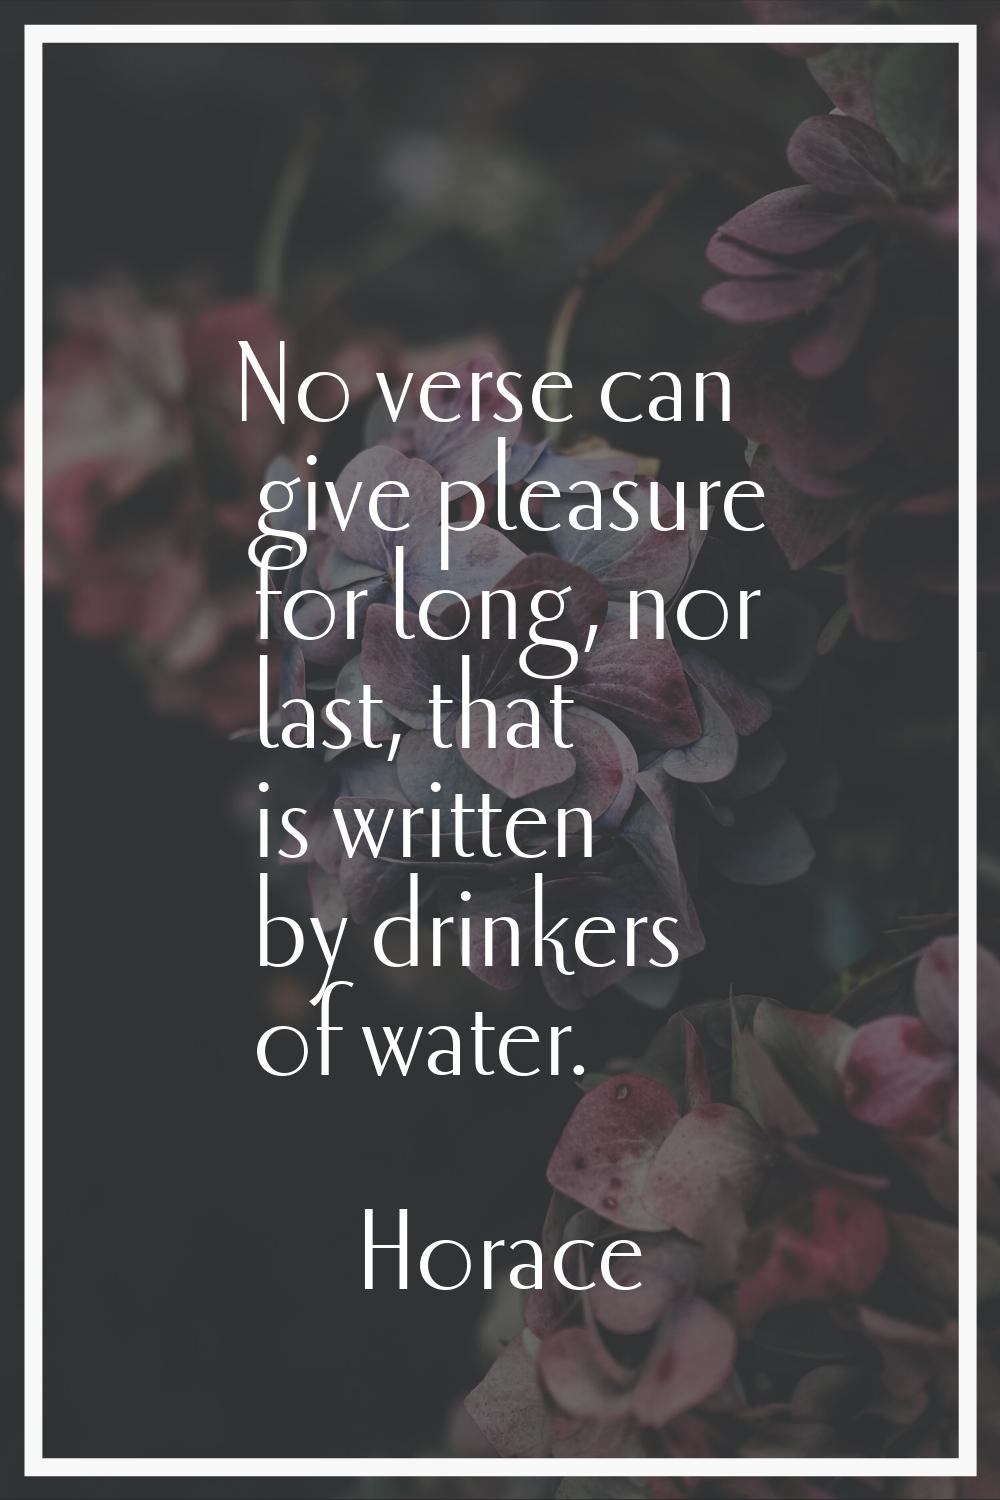 No verse can give pleasure for long, nor last, that is written by drinkers of water.